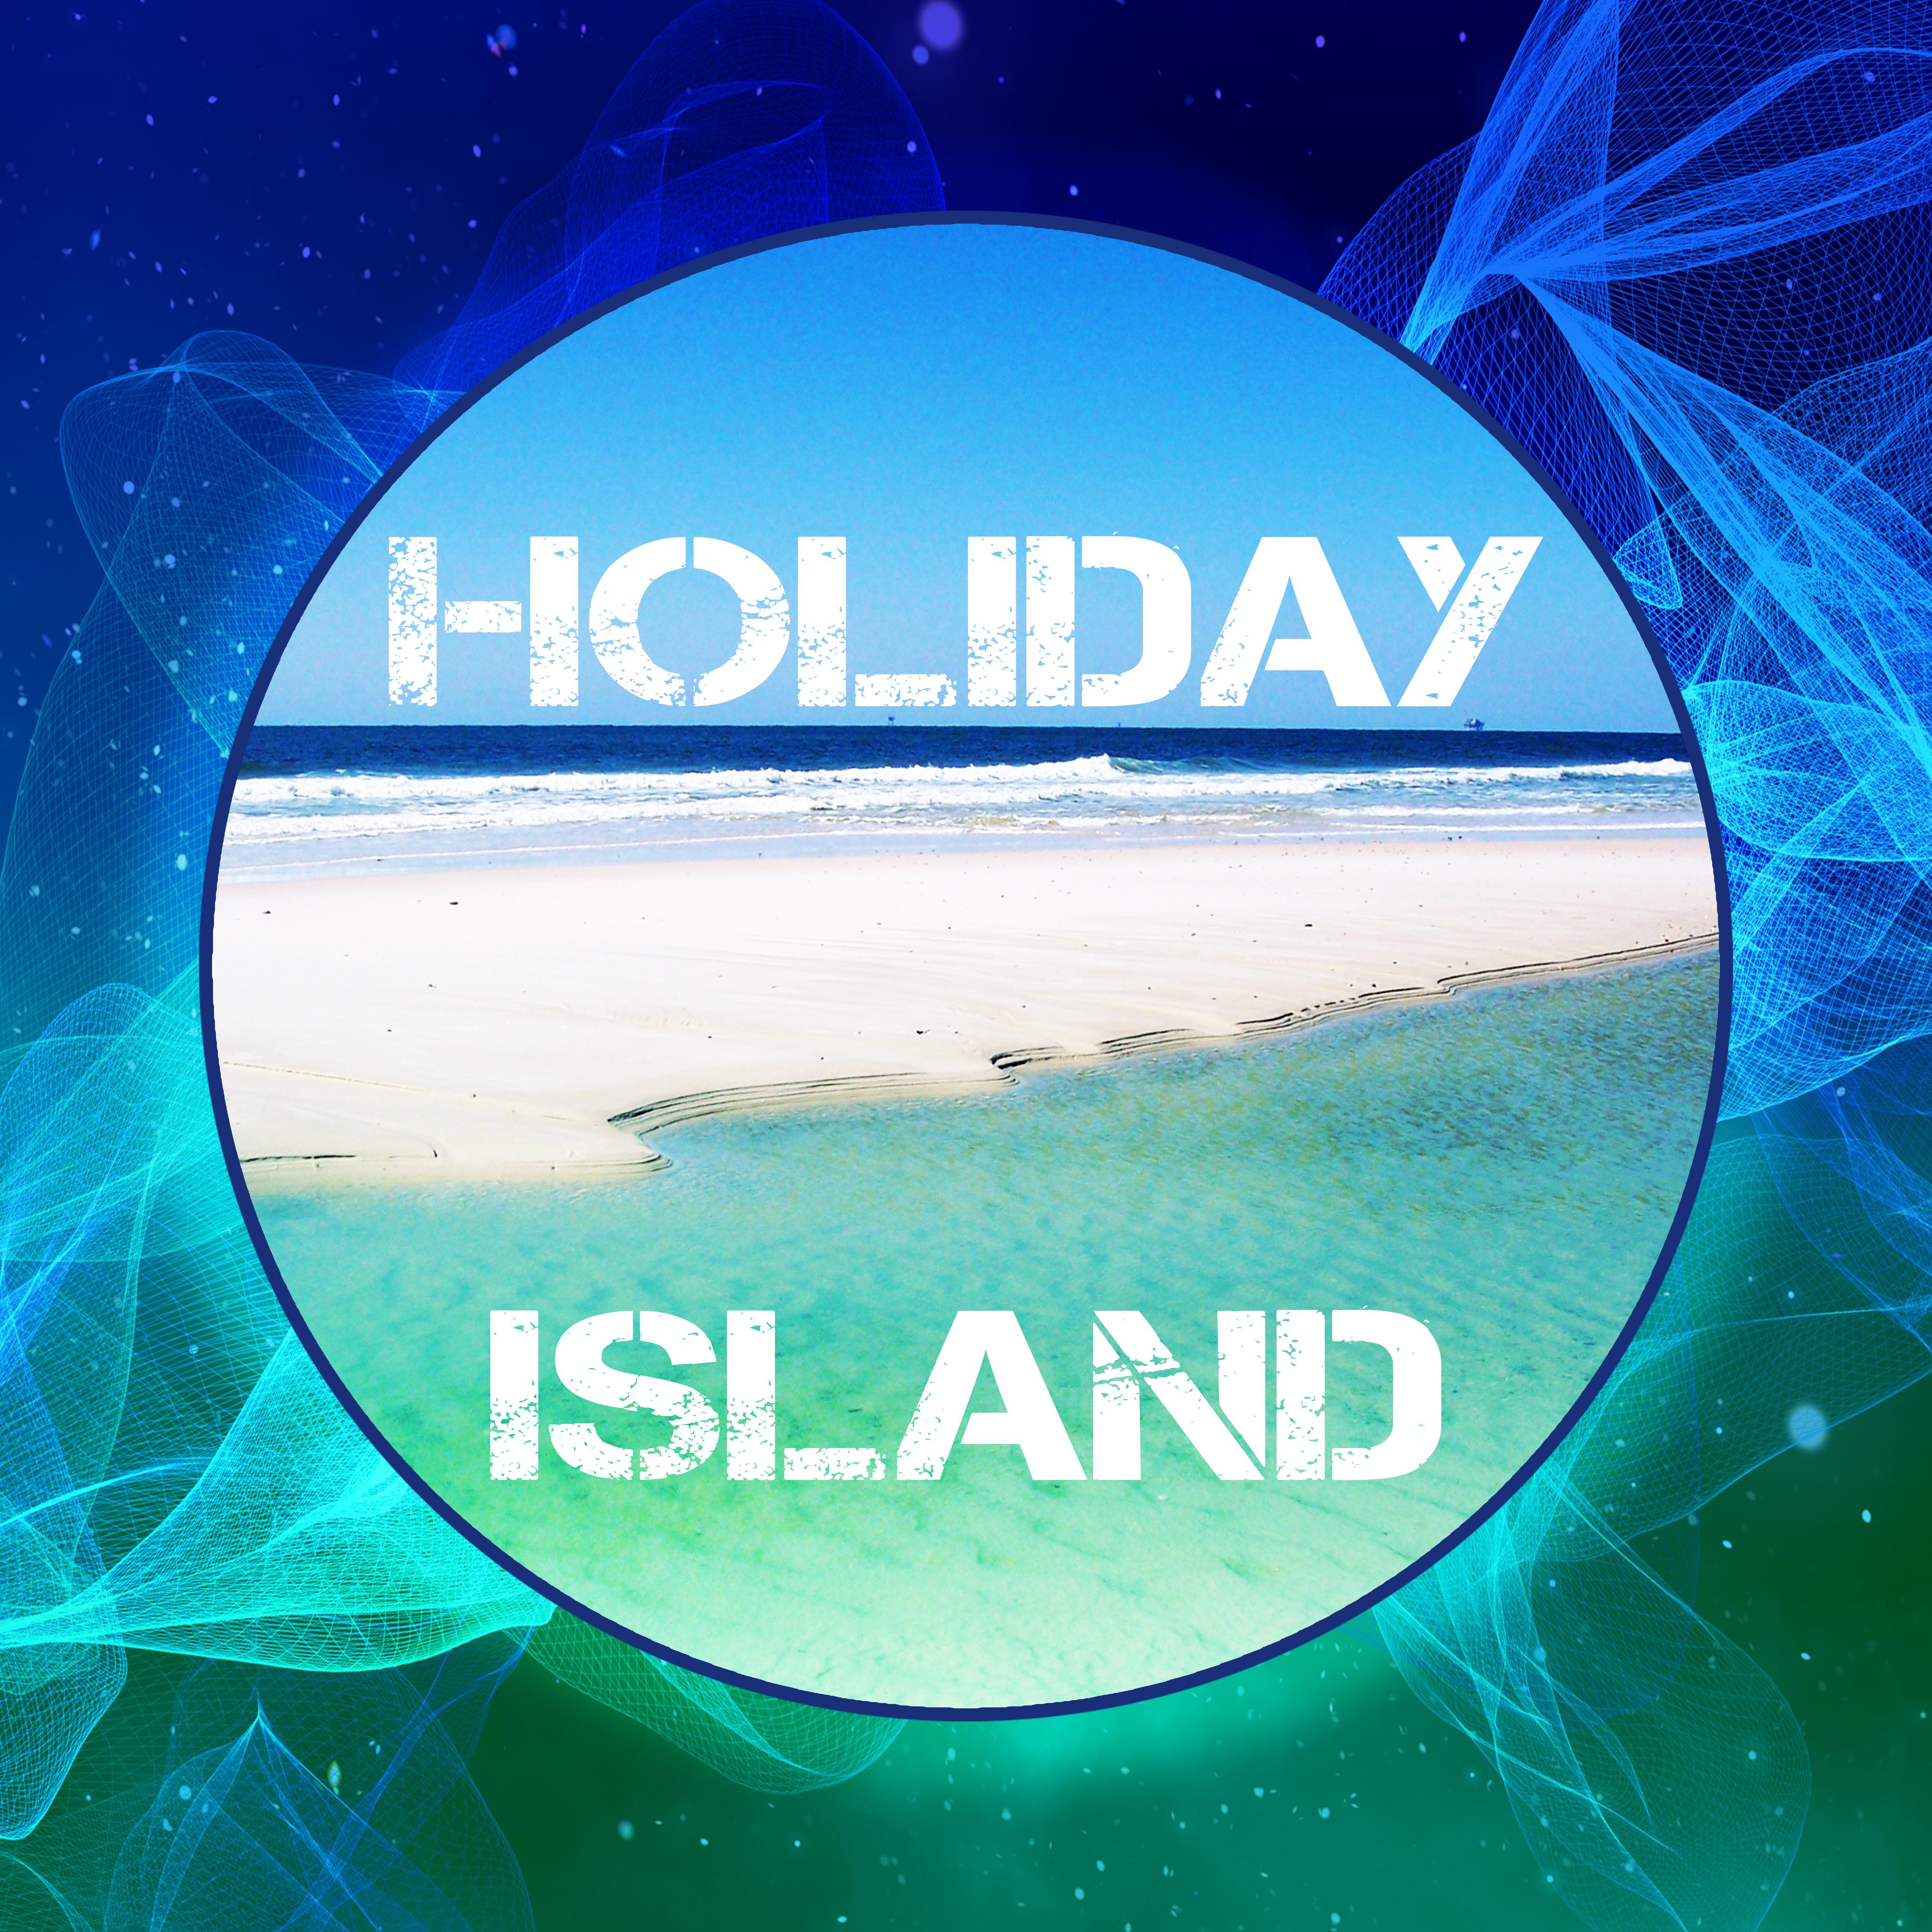 Holiday Island – Peaceful Music for Relaxation, Deep Chill Out Music, Sounds of Sea, Cocktail & Drinks, Summertime, Ethnic Music